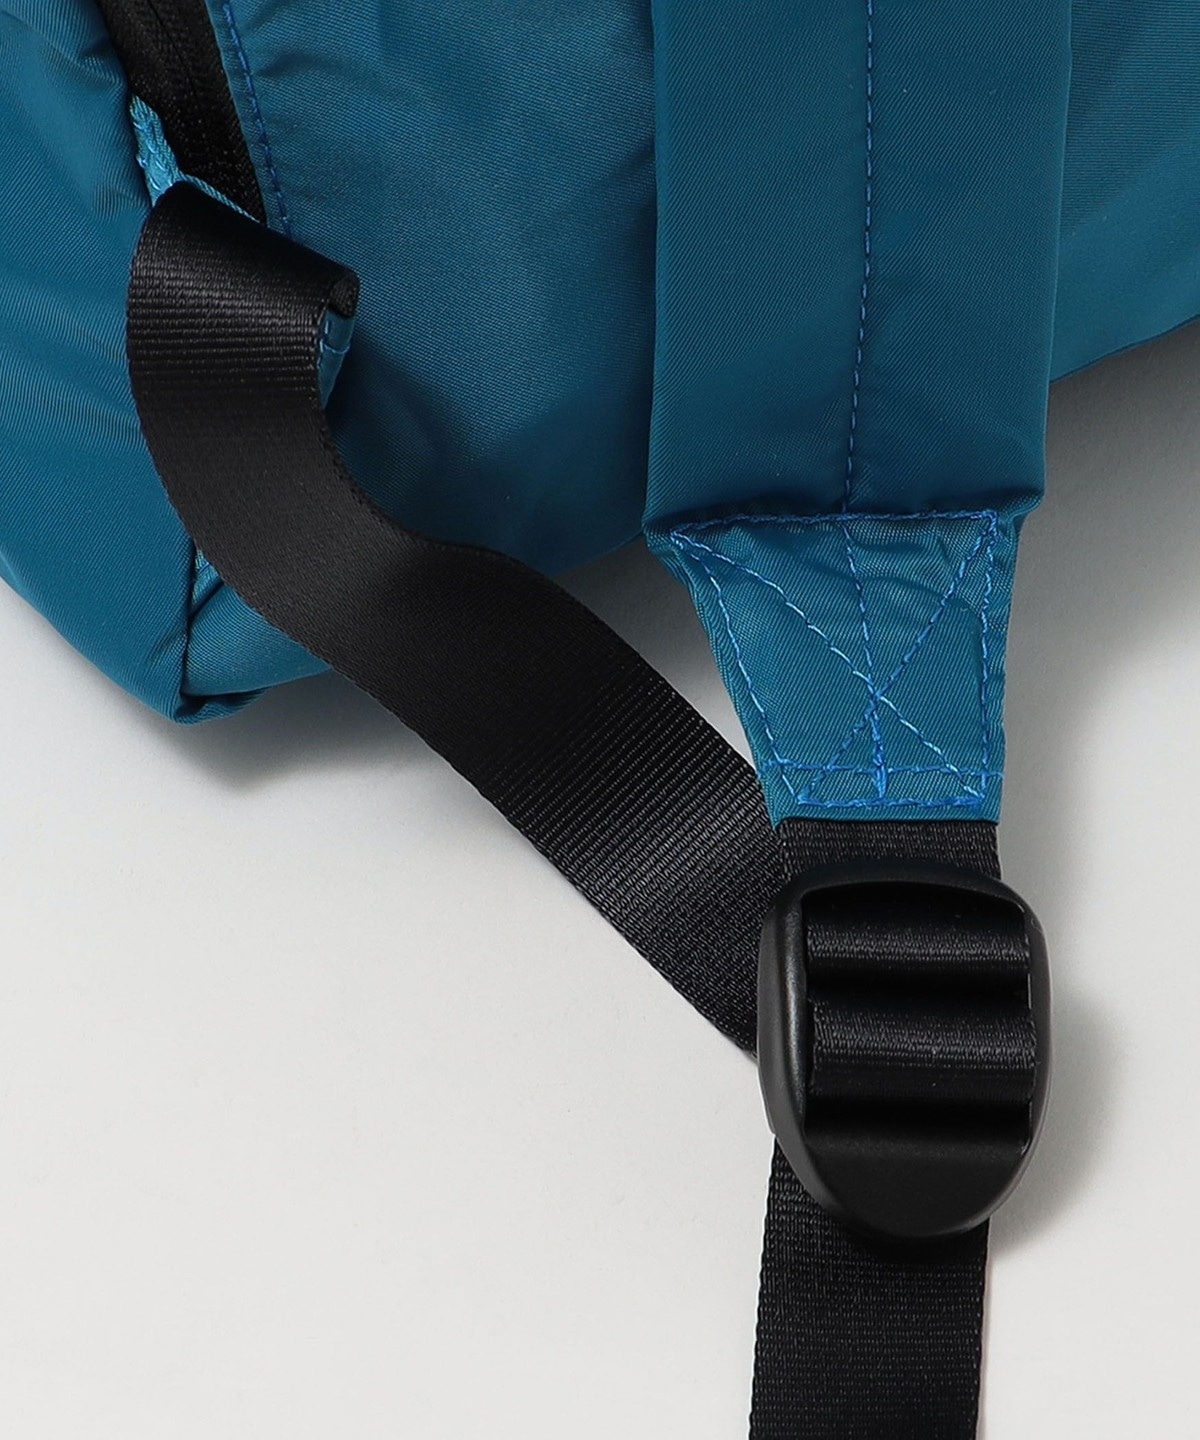 SHIPS別注】STANDARD SUPPLY: PACKABLE DAYPACK: バッグ SHIPS 公式 ...